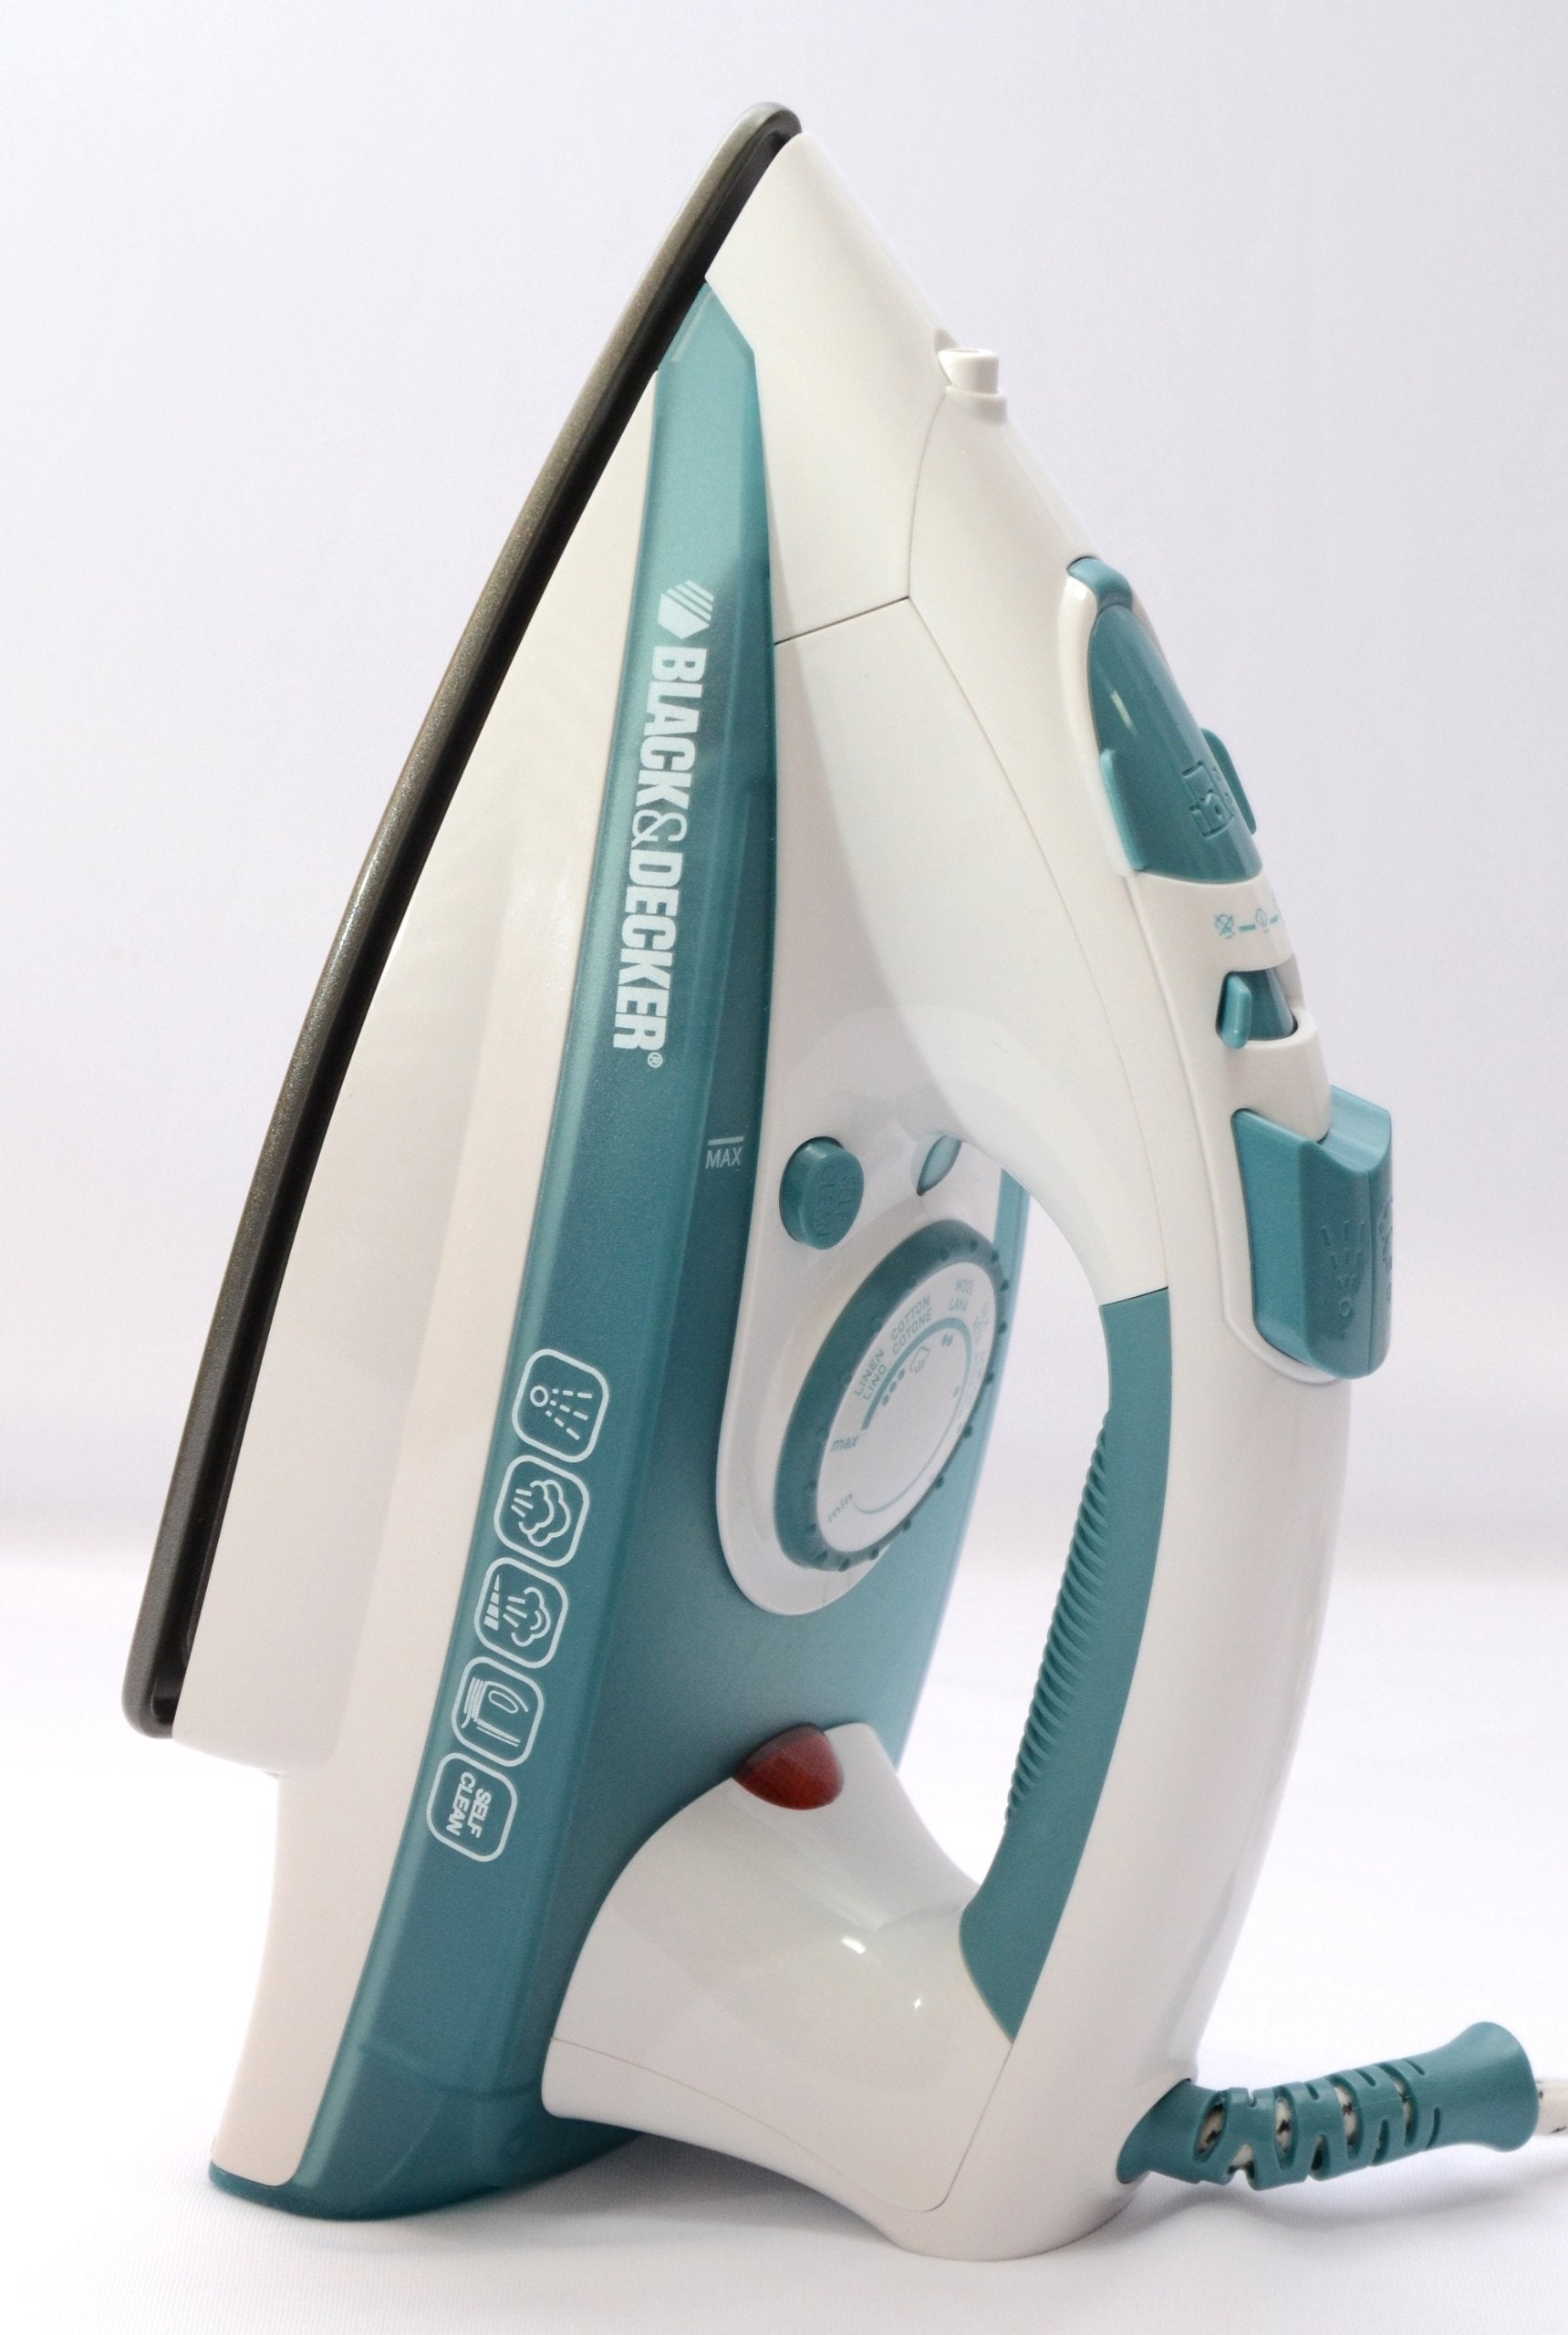 Black & Decker 1750W Steam Iron Ceramic Coated Soleplate with Anti Calc Drip Self Clean and Auto Shutoff, Removes Stubborn Creases Quickly Easily X1600-B5